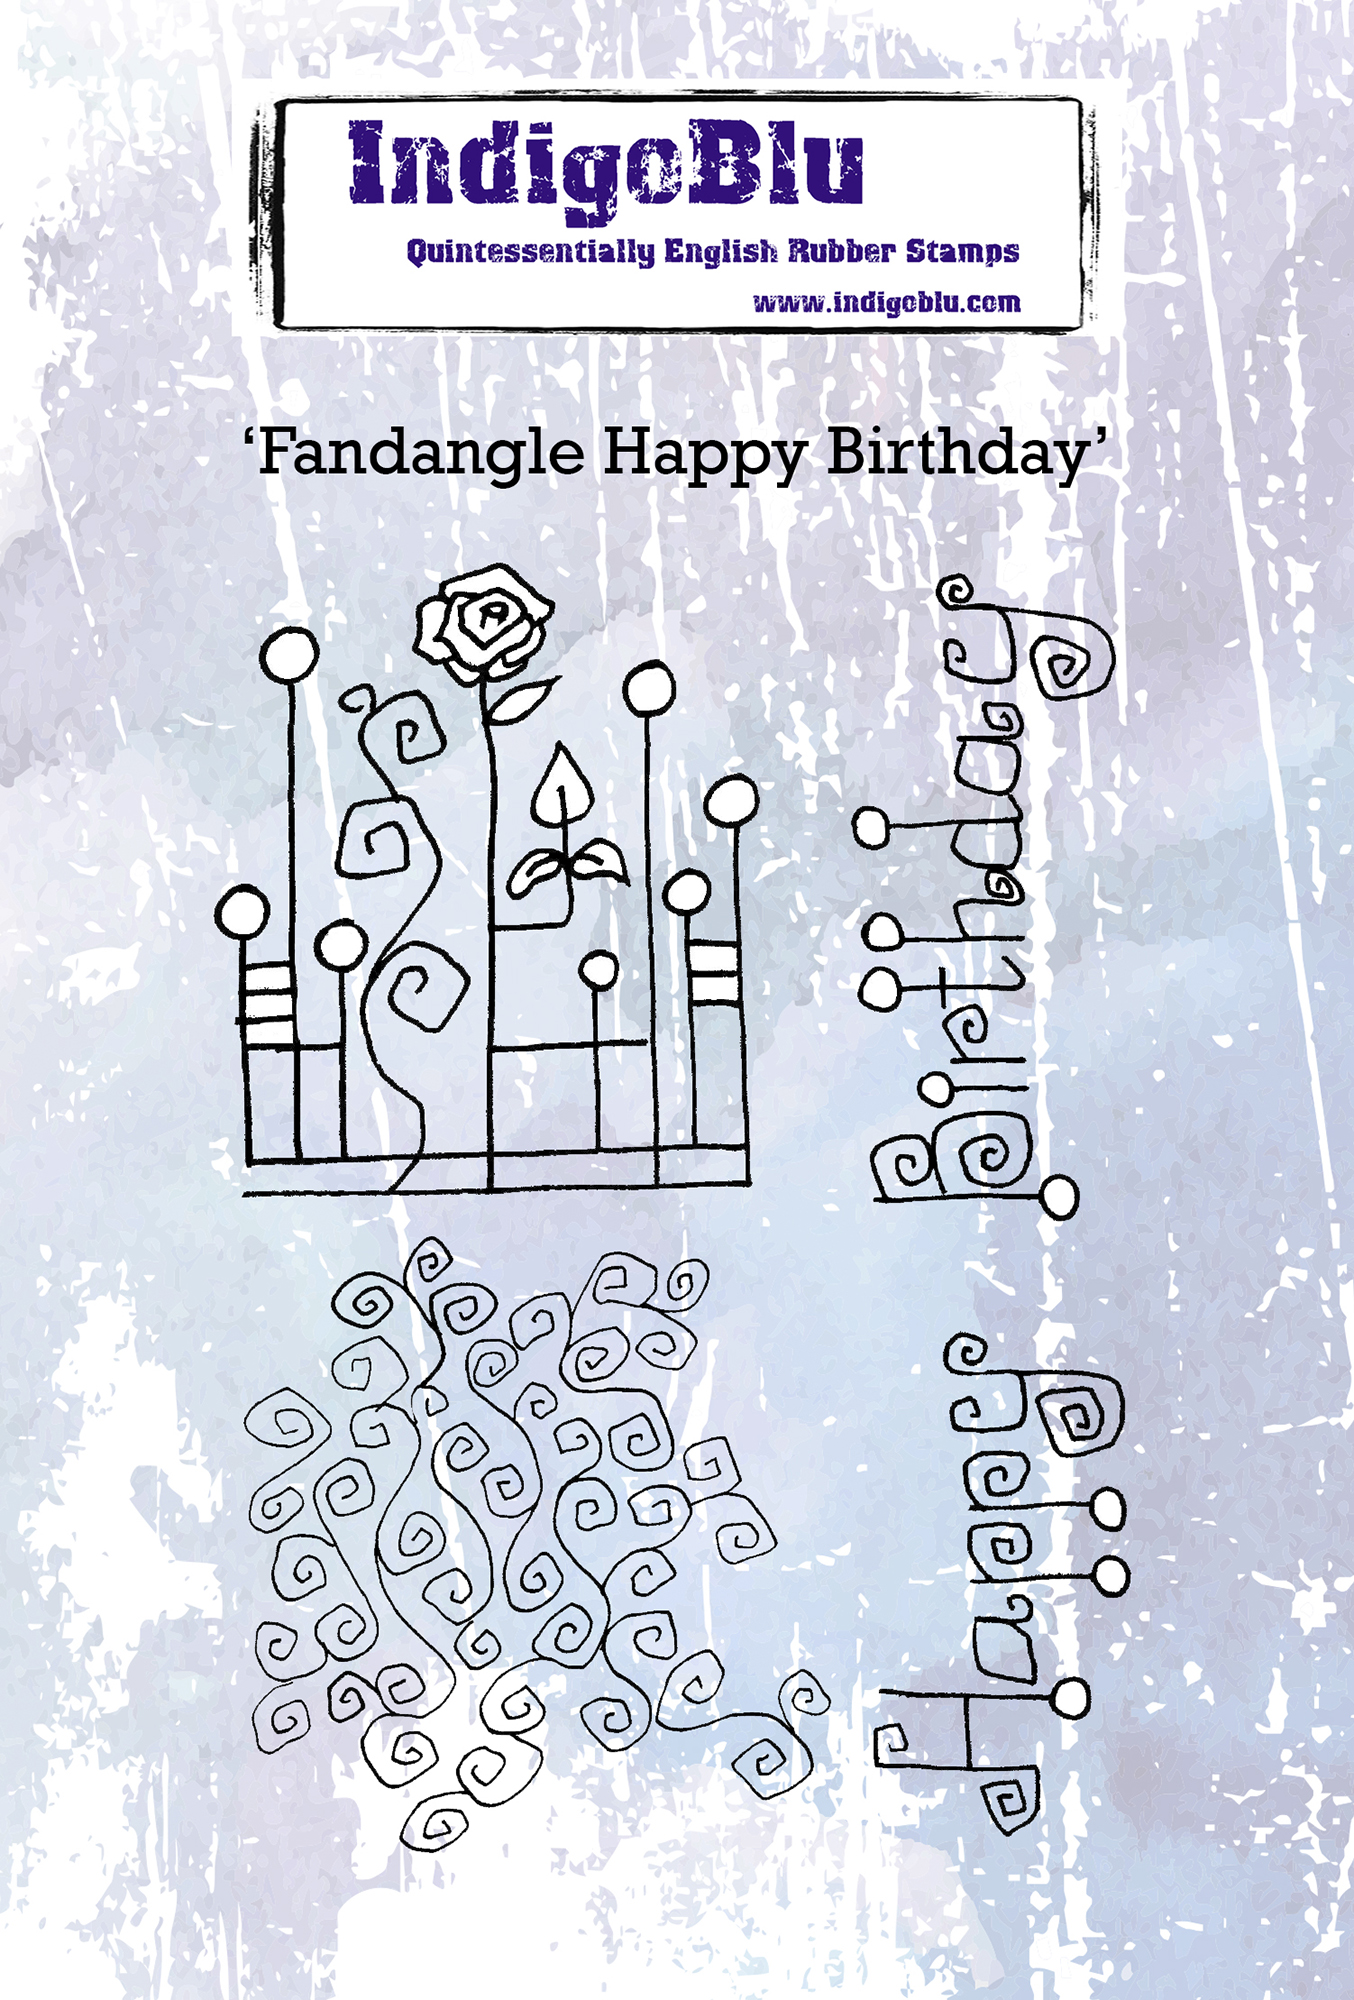 Fandangle Happy Birthday A6 Red Rubber Stamp by Kay Halliwell-Sutton